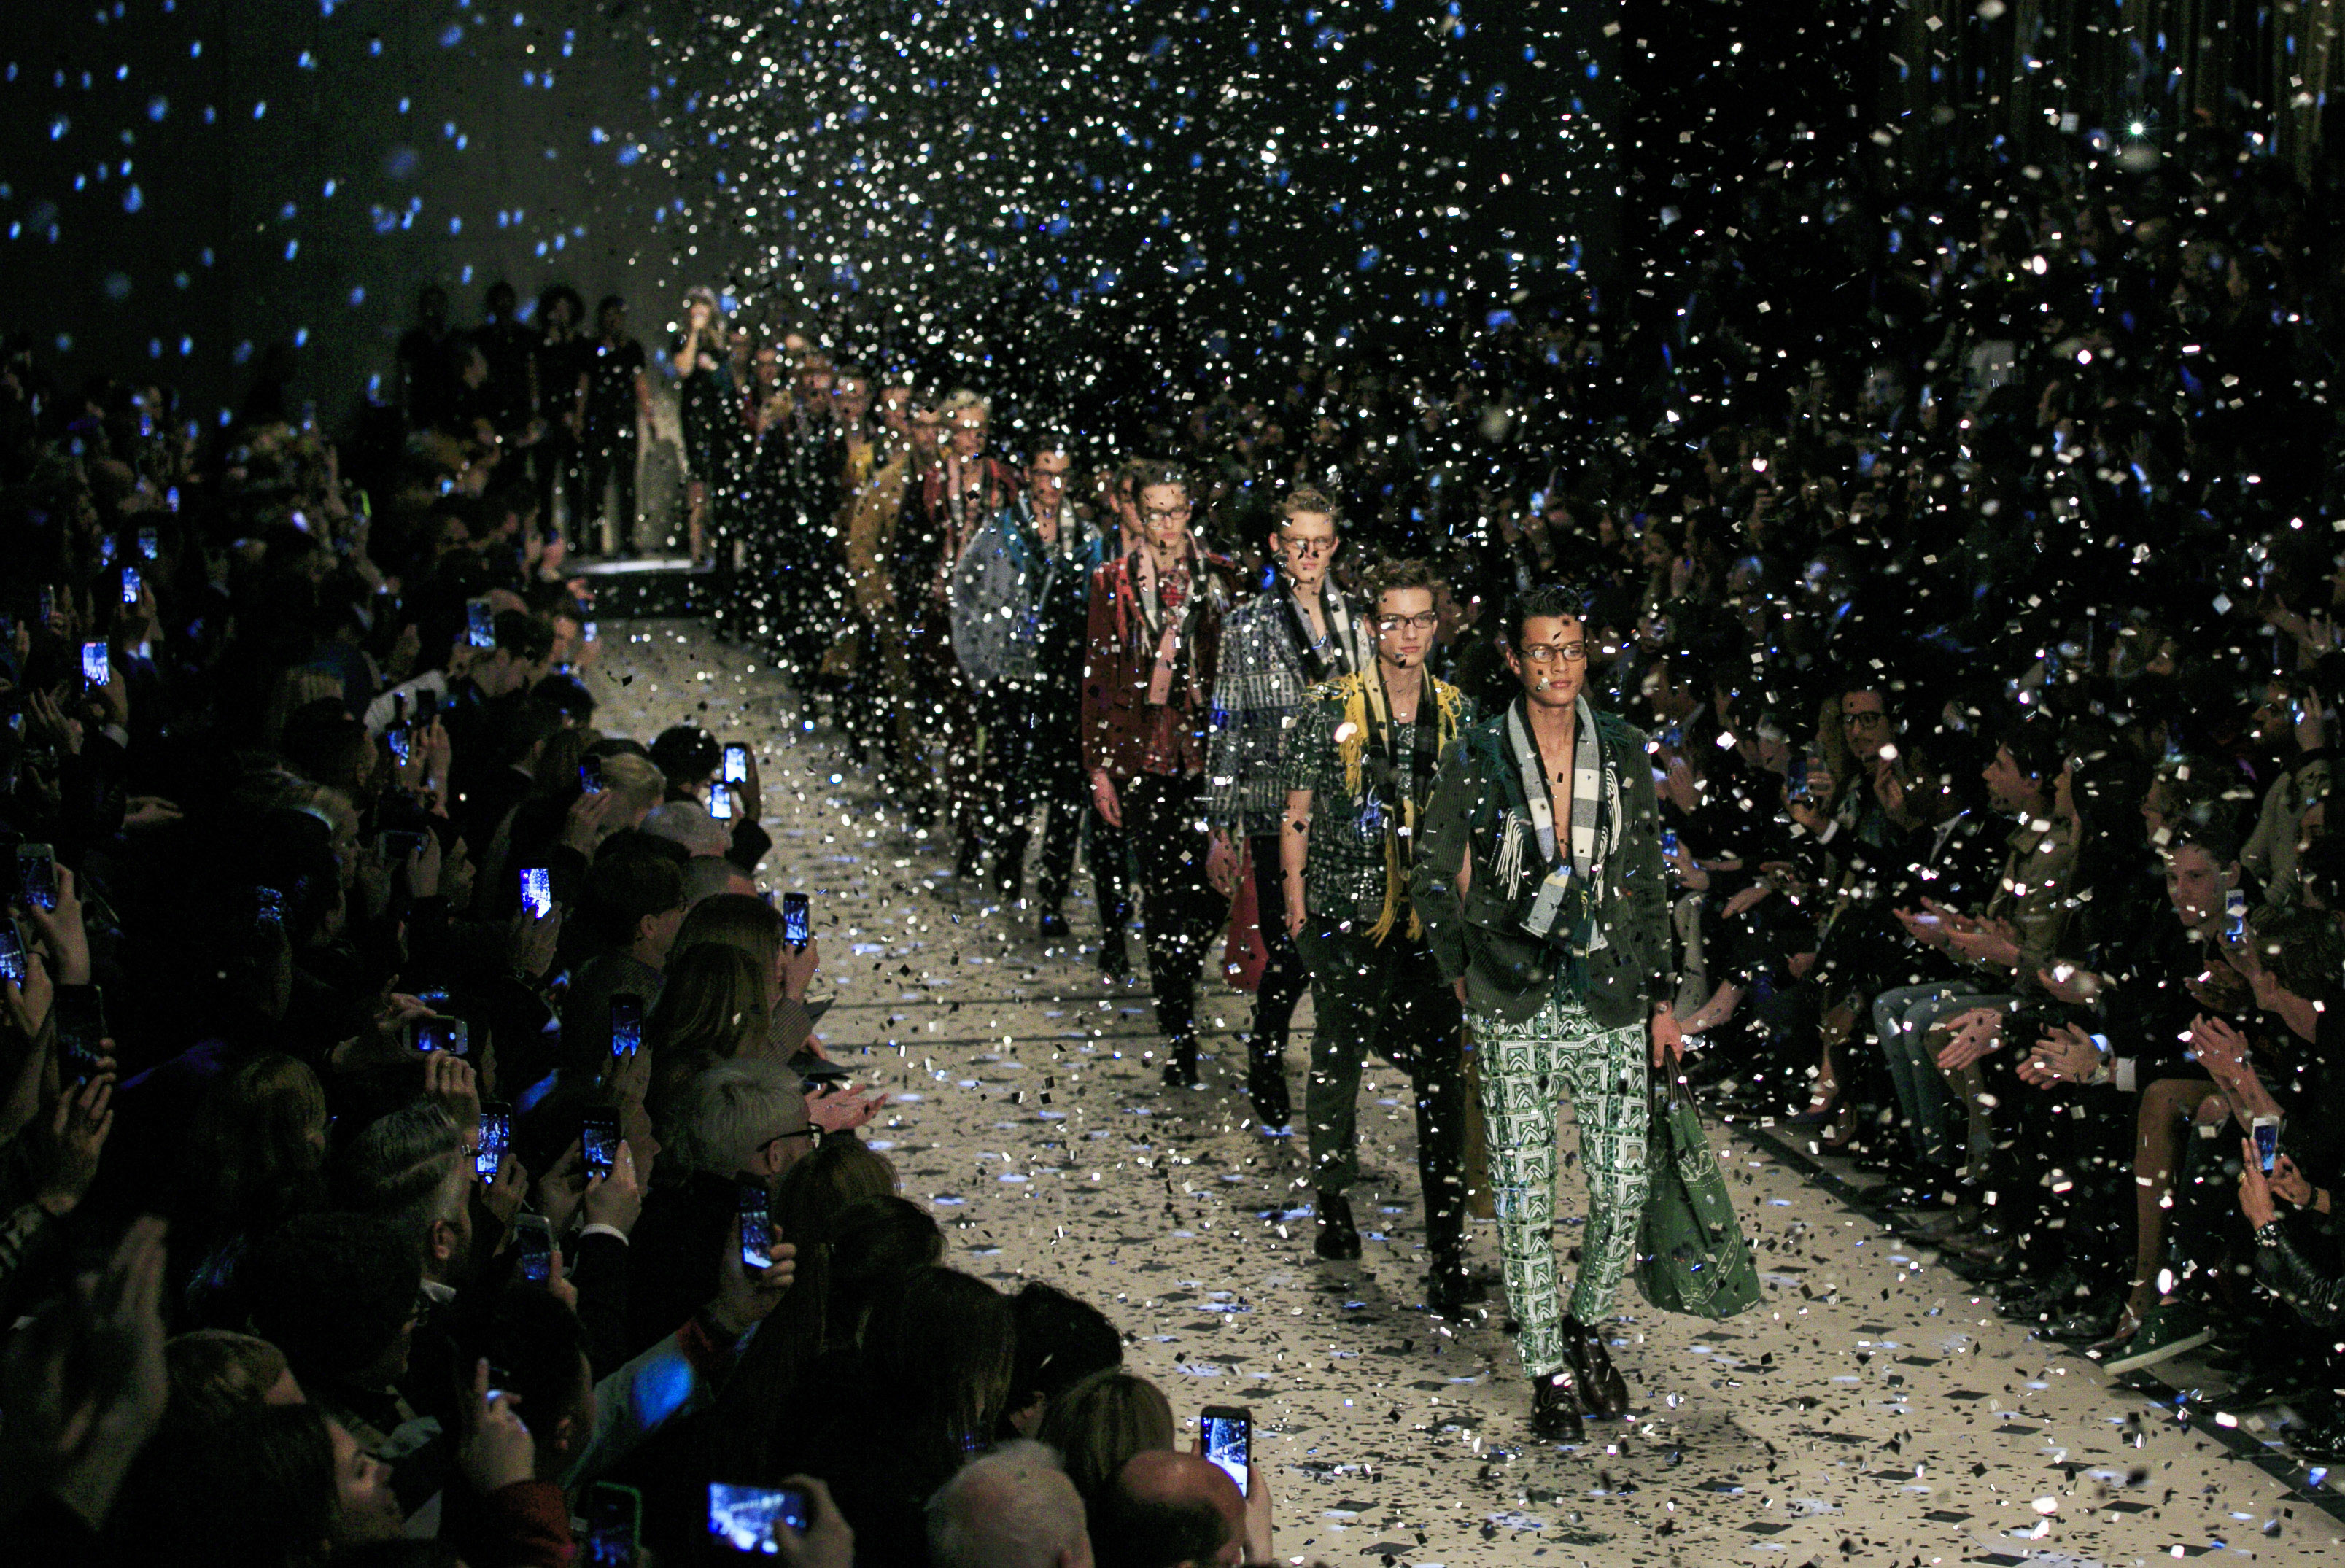 Burberry, who showed its collection at LCM for the past three years, was notably absent from the fashion event this year.